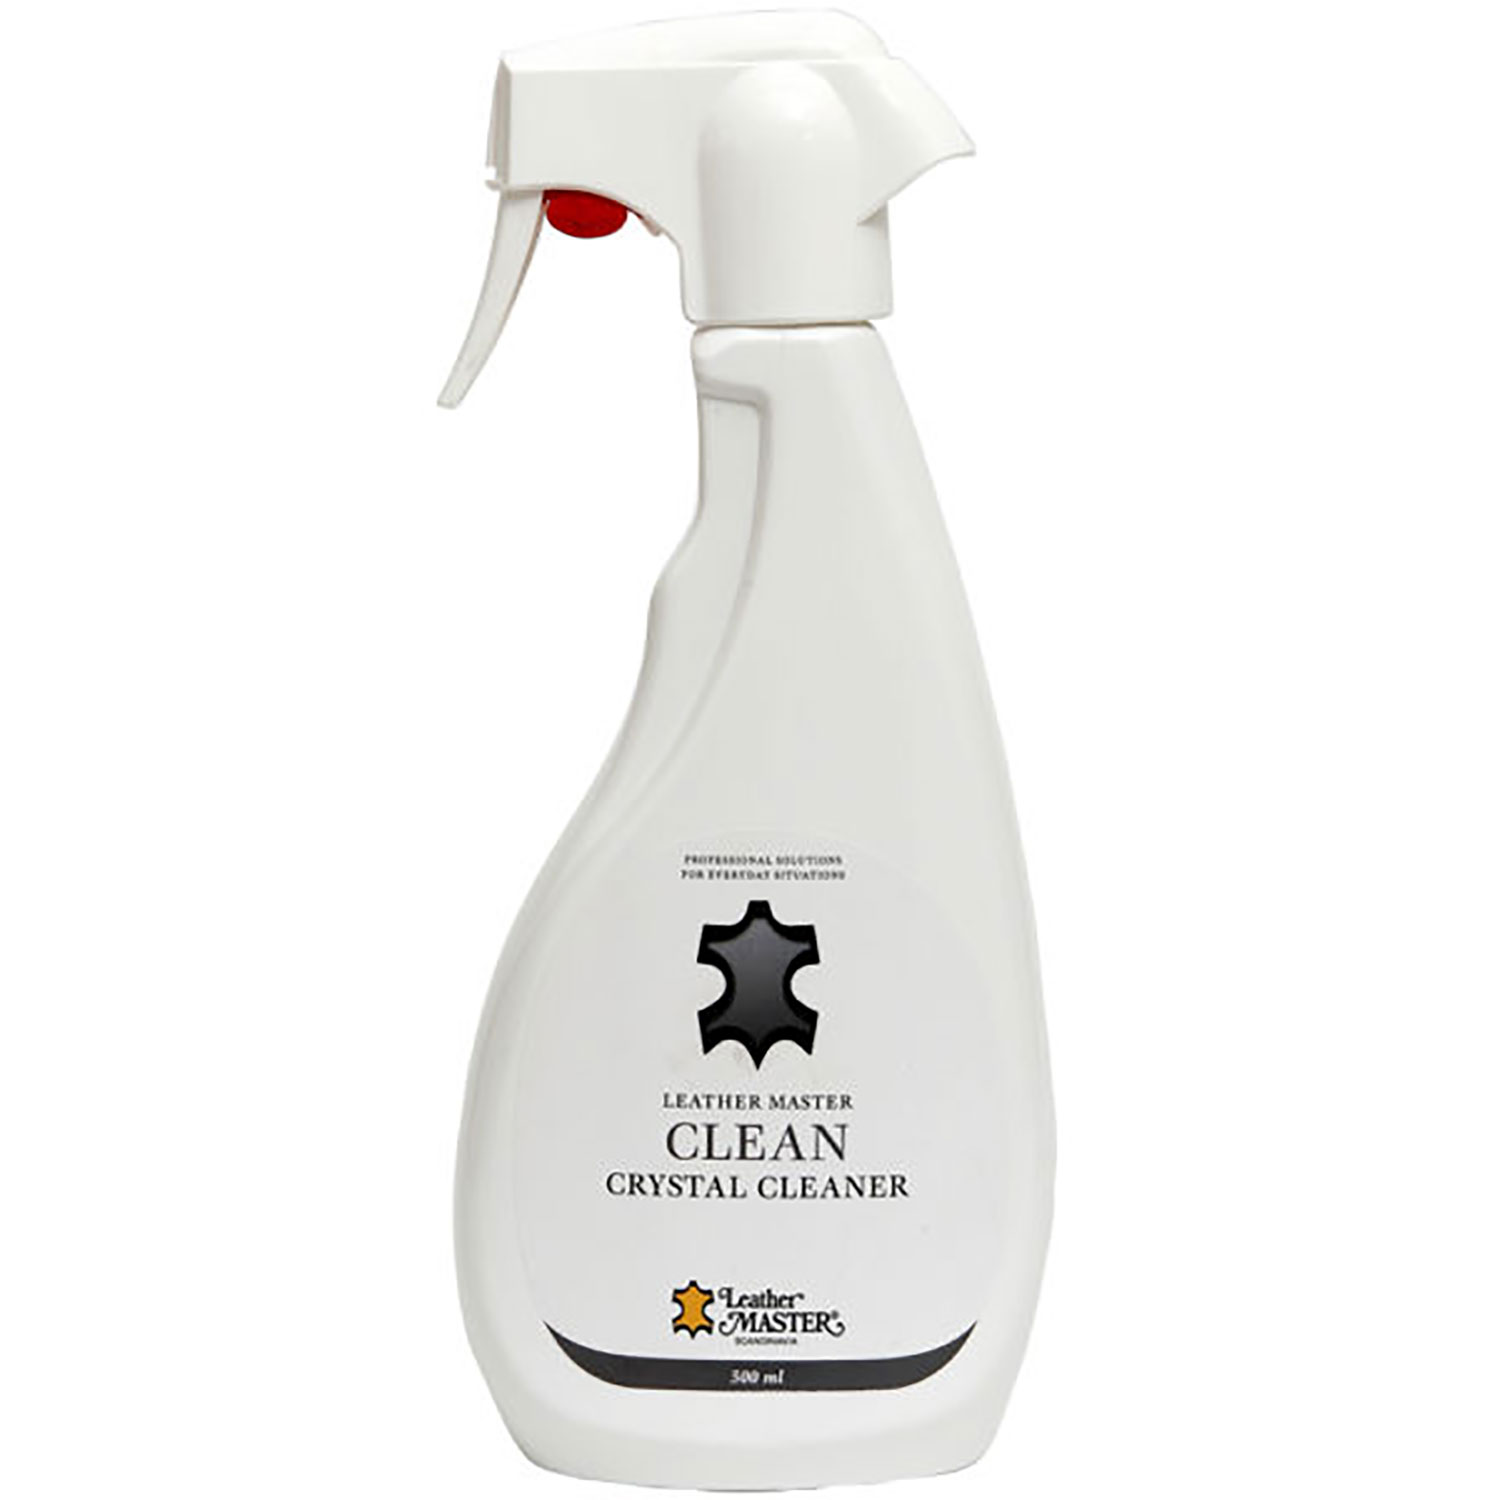 Leather Master Crystal Cleaner 500 ml